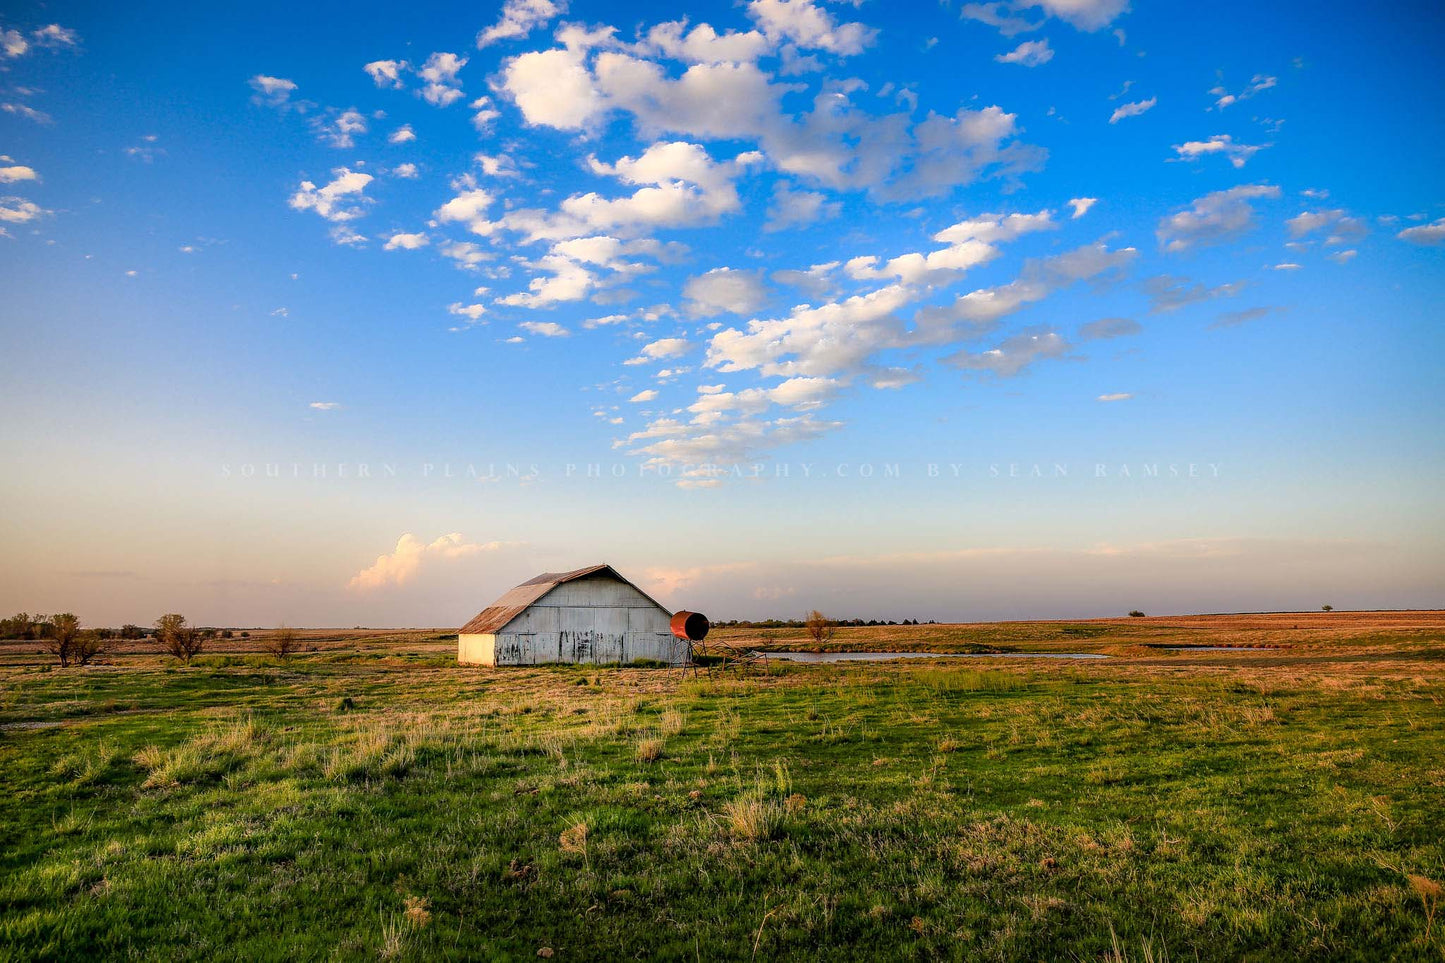 Country photography print of a rustic white barn sitting under a big blue sky on a spring evening in Oklahoma by Sean Ramsey of Southern Plains Photography.